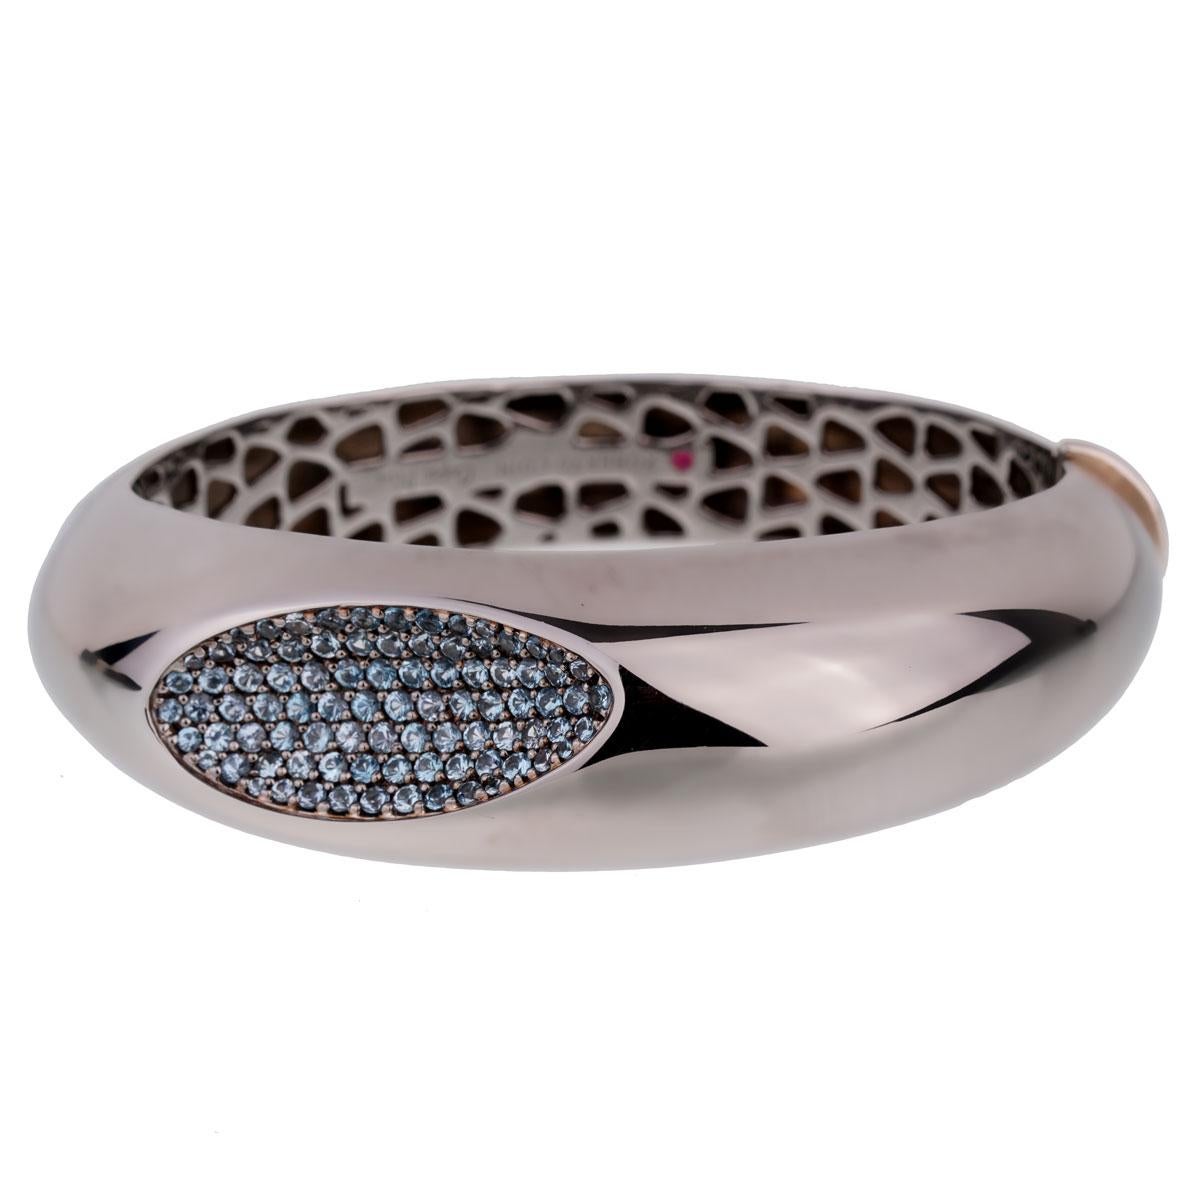 A chic Roberto Coin bangle bracelet from the Capri Plus collection set with round blue topaz in silver plated Ruthenium for a stunning gun metal color. 

The bracelet measures 6.5